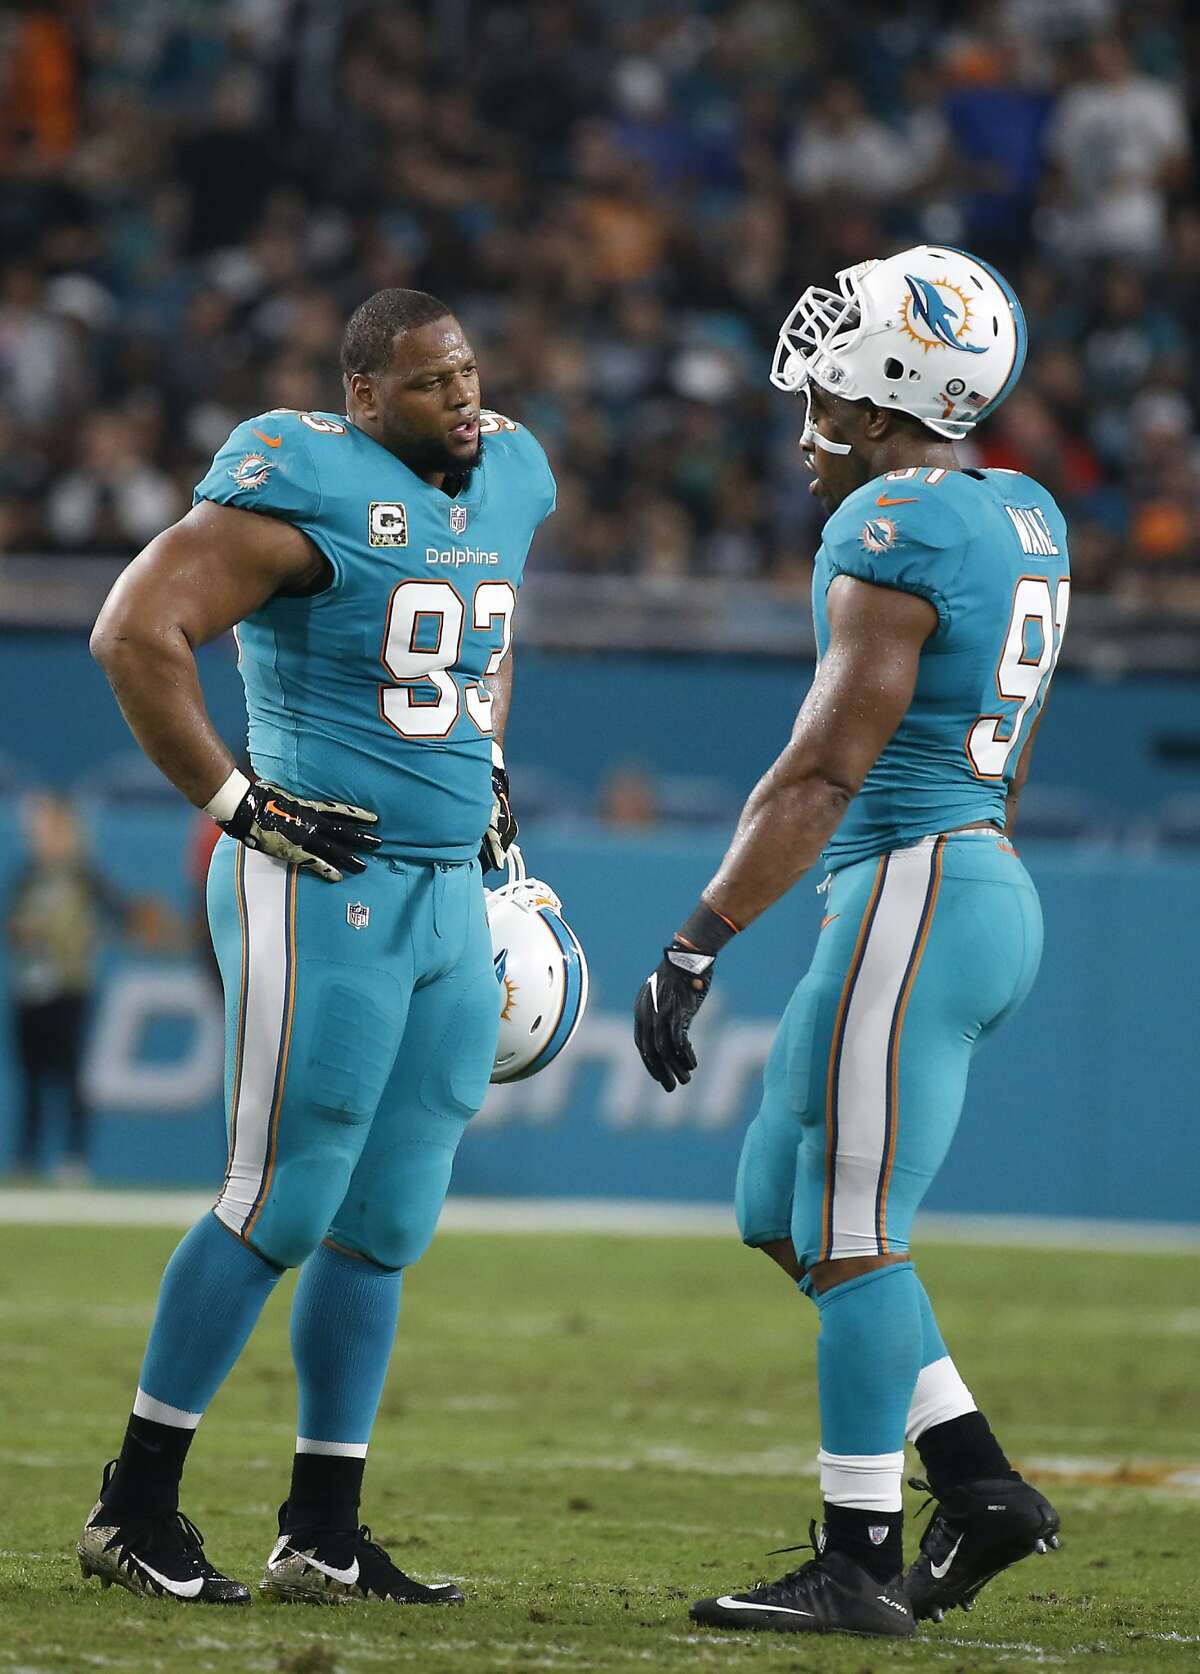 Miami Dolphins defensive tackle Ndamukong Suh (93) talks to Miami Dolphins defensive end Cameron Wake (91), during the first half of an NFL football game against the Oakland Raiders, Sunday, Nov. 5, 2017, in Miami Gardens, Fla. (AP Photo/Wilfredo Lee)